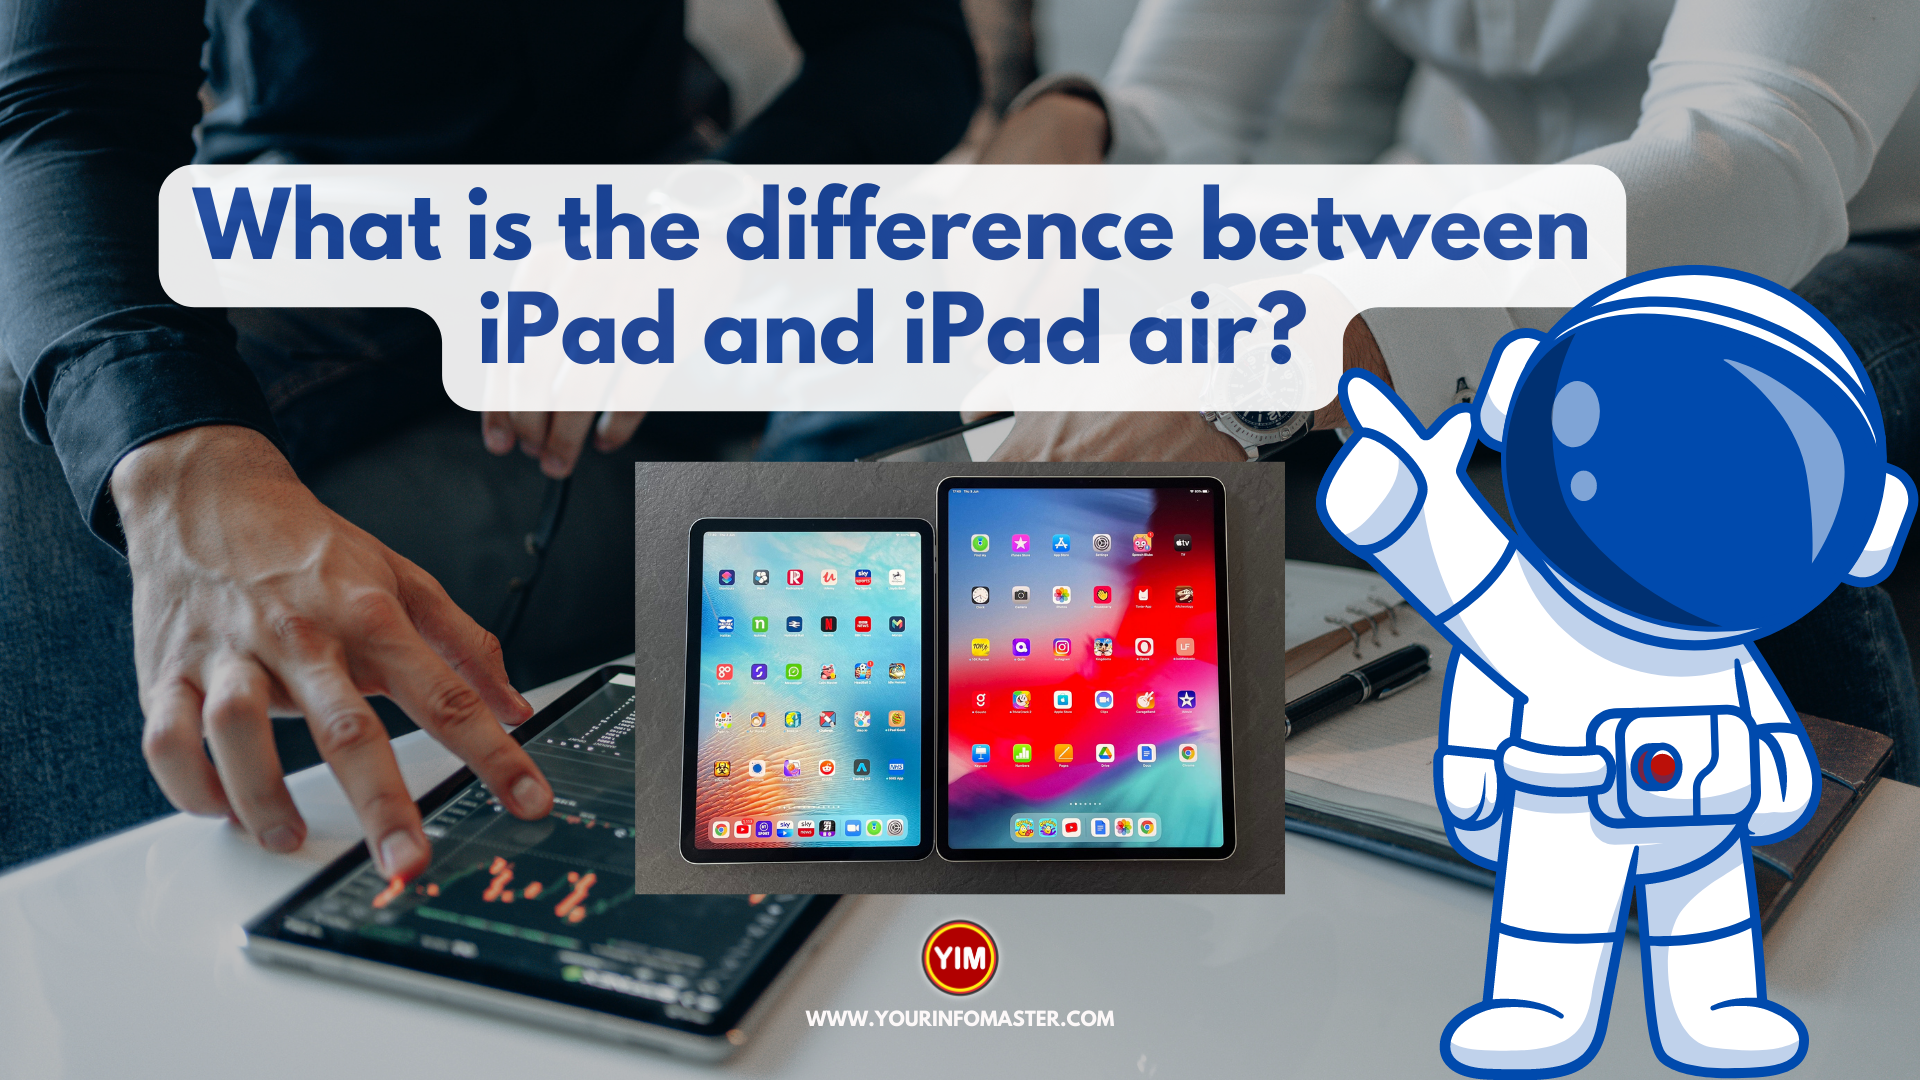 What is the difference between iPad and iPad air